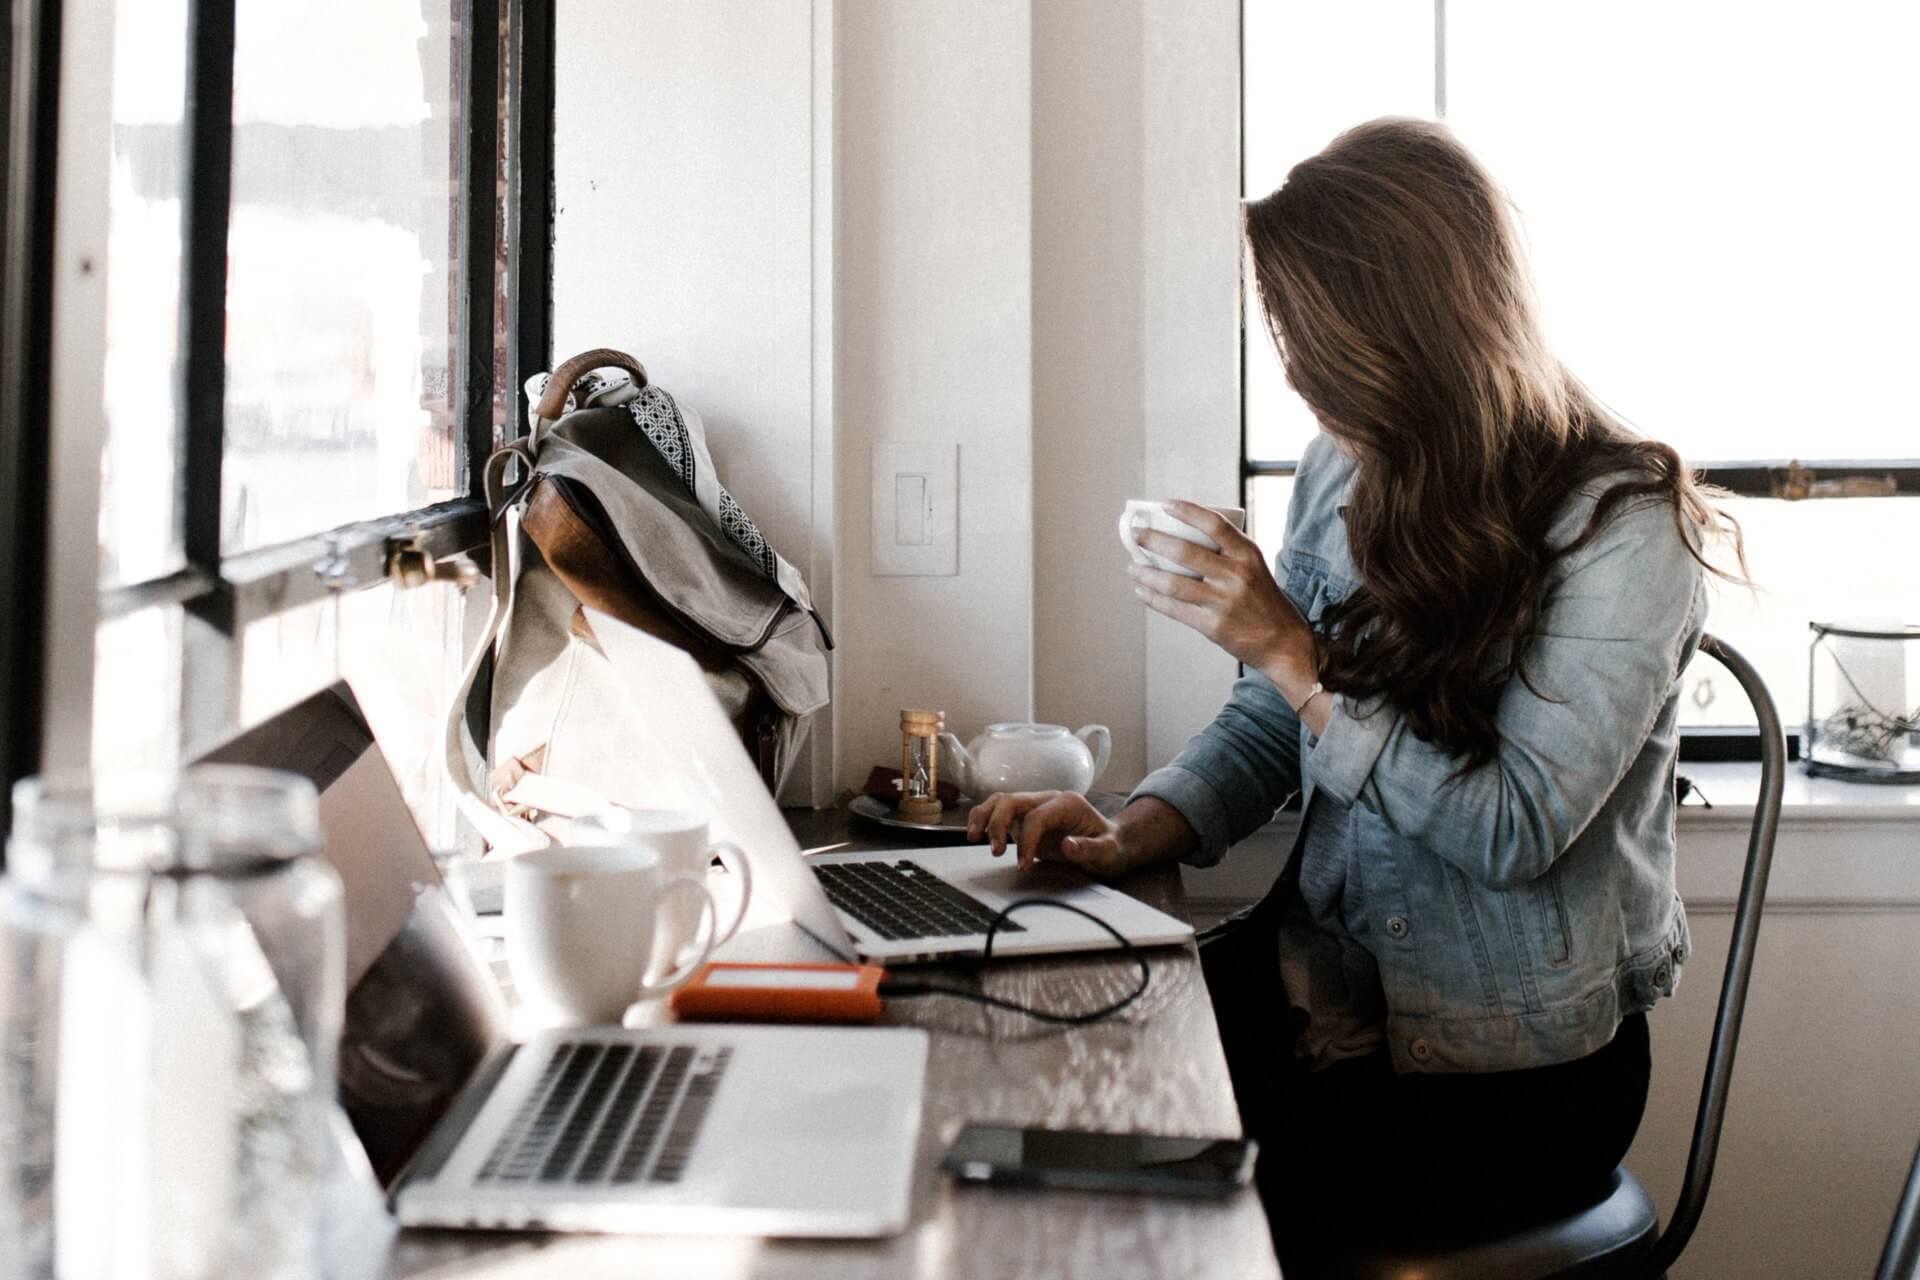 A woman with long brown hair wearing a denim jacket works at her laptop while drinking a cup of tea (Photo by Andrew Neel on Unsplash)